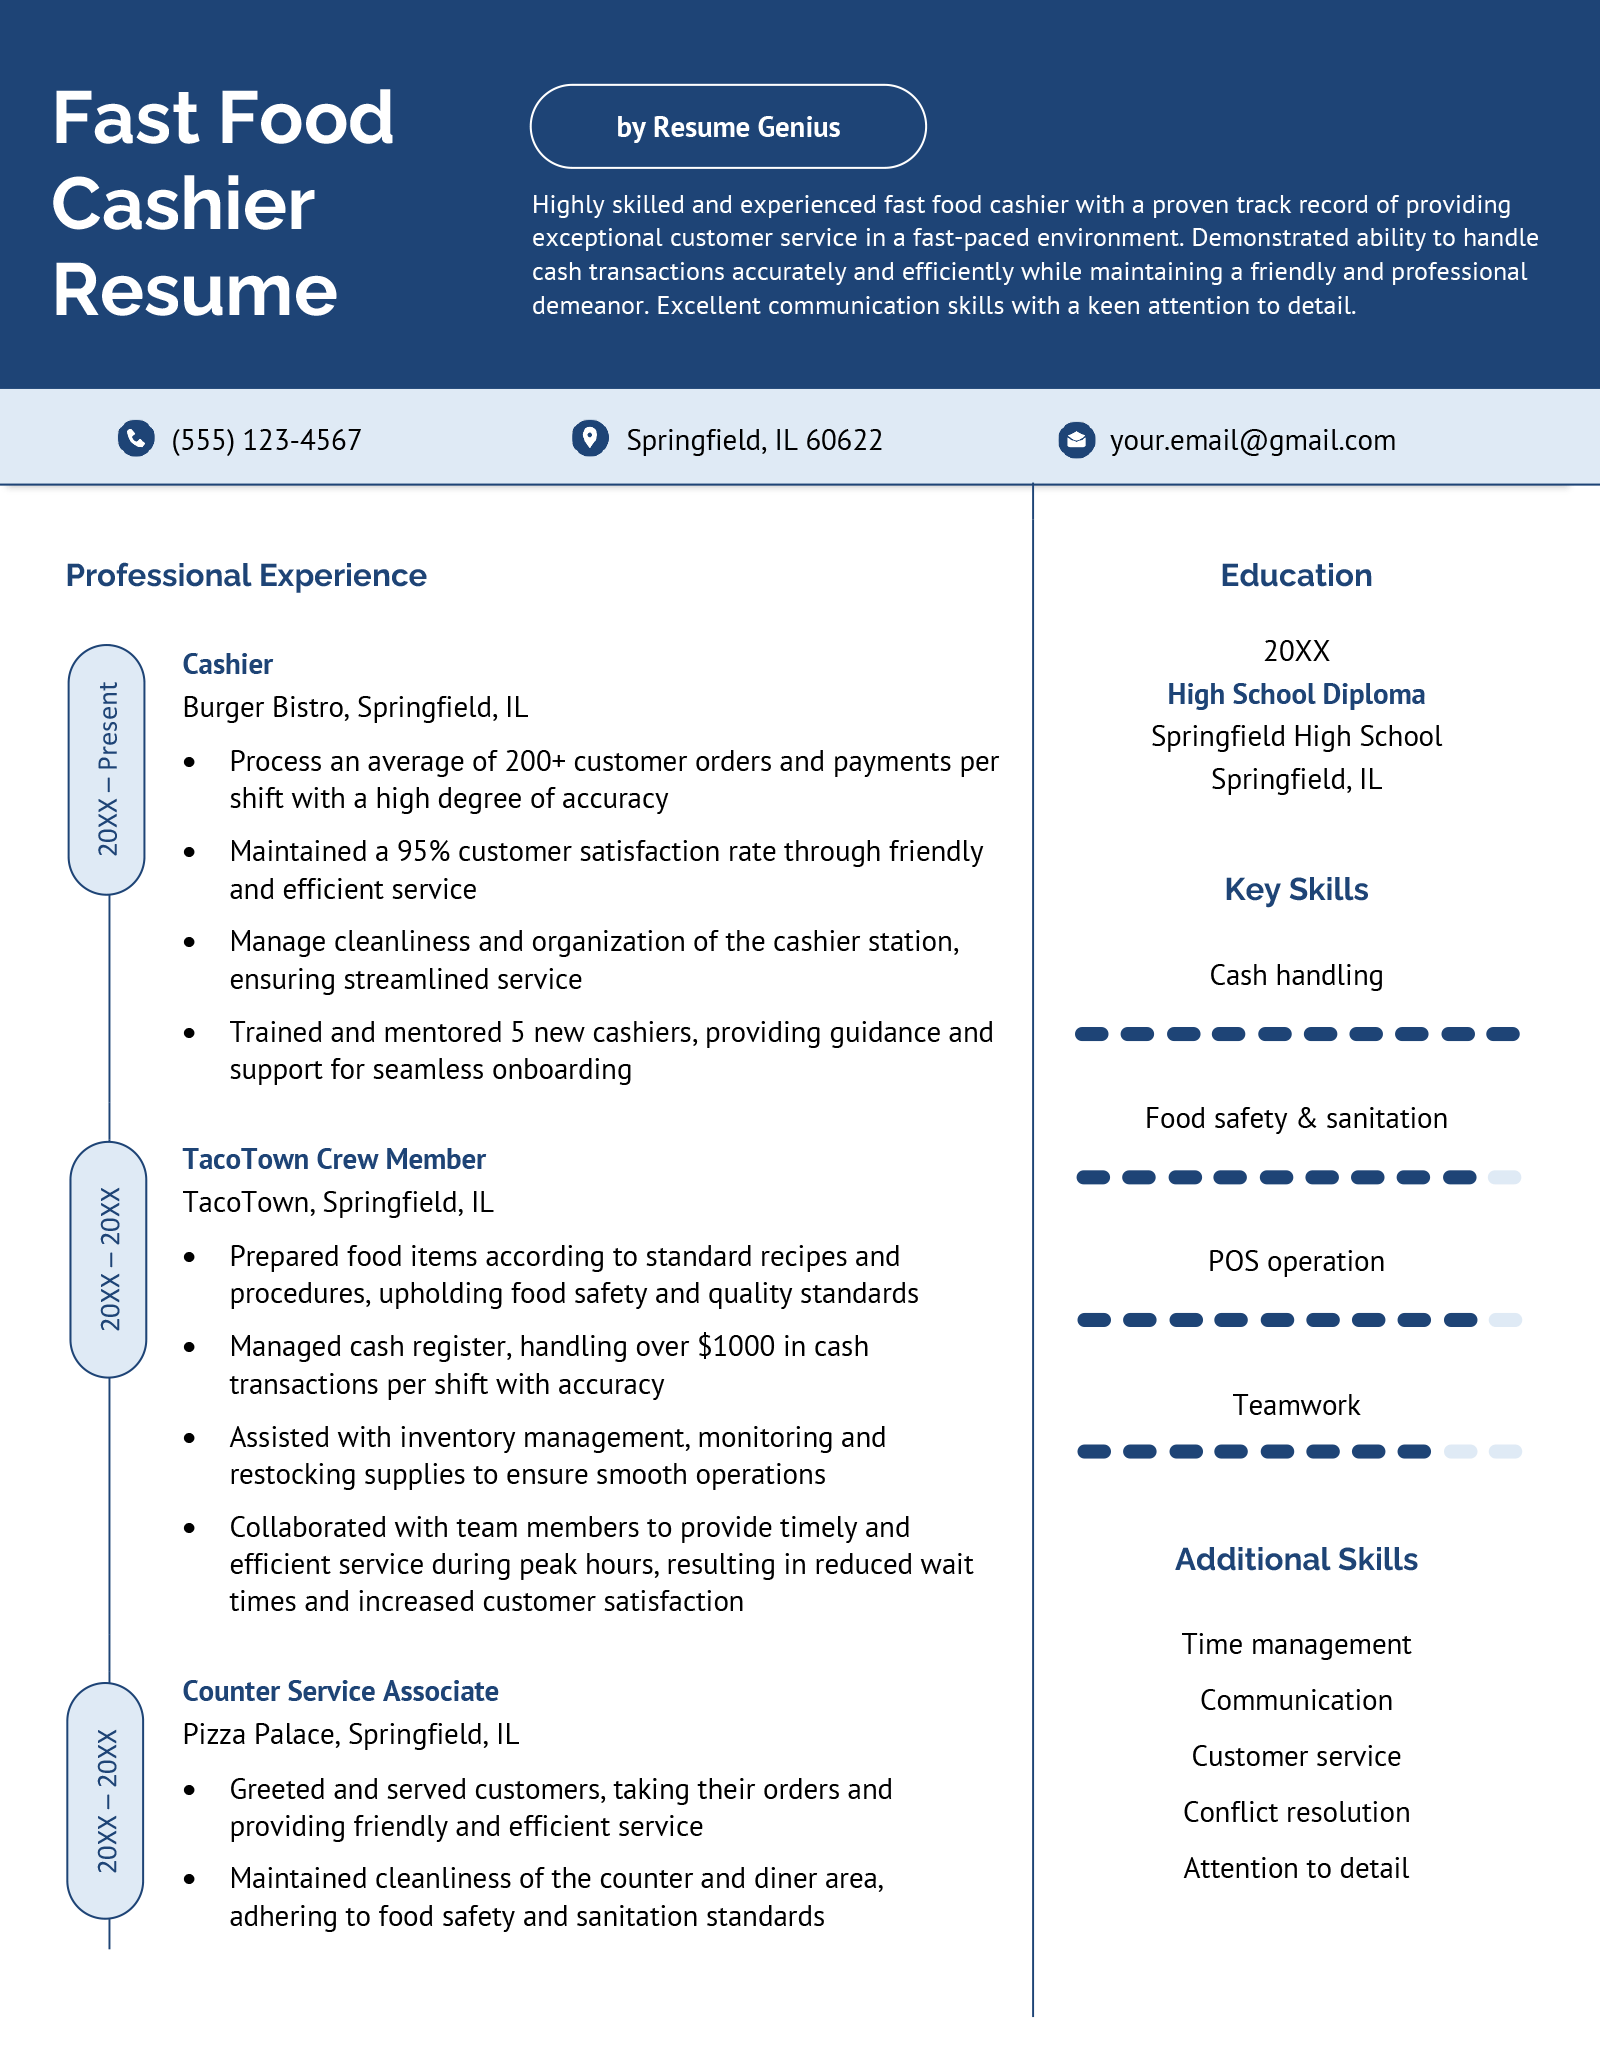 Image of a sample fast food cashier resume with a bold blue header.